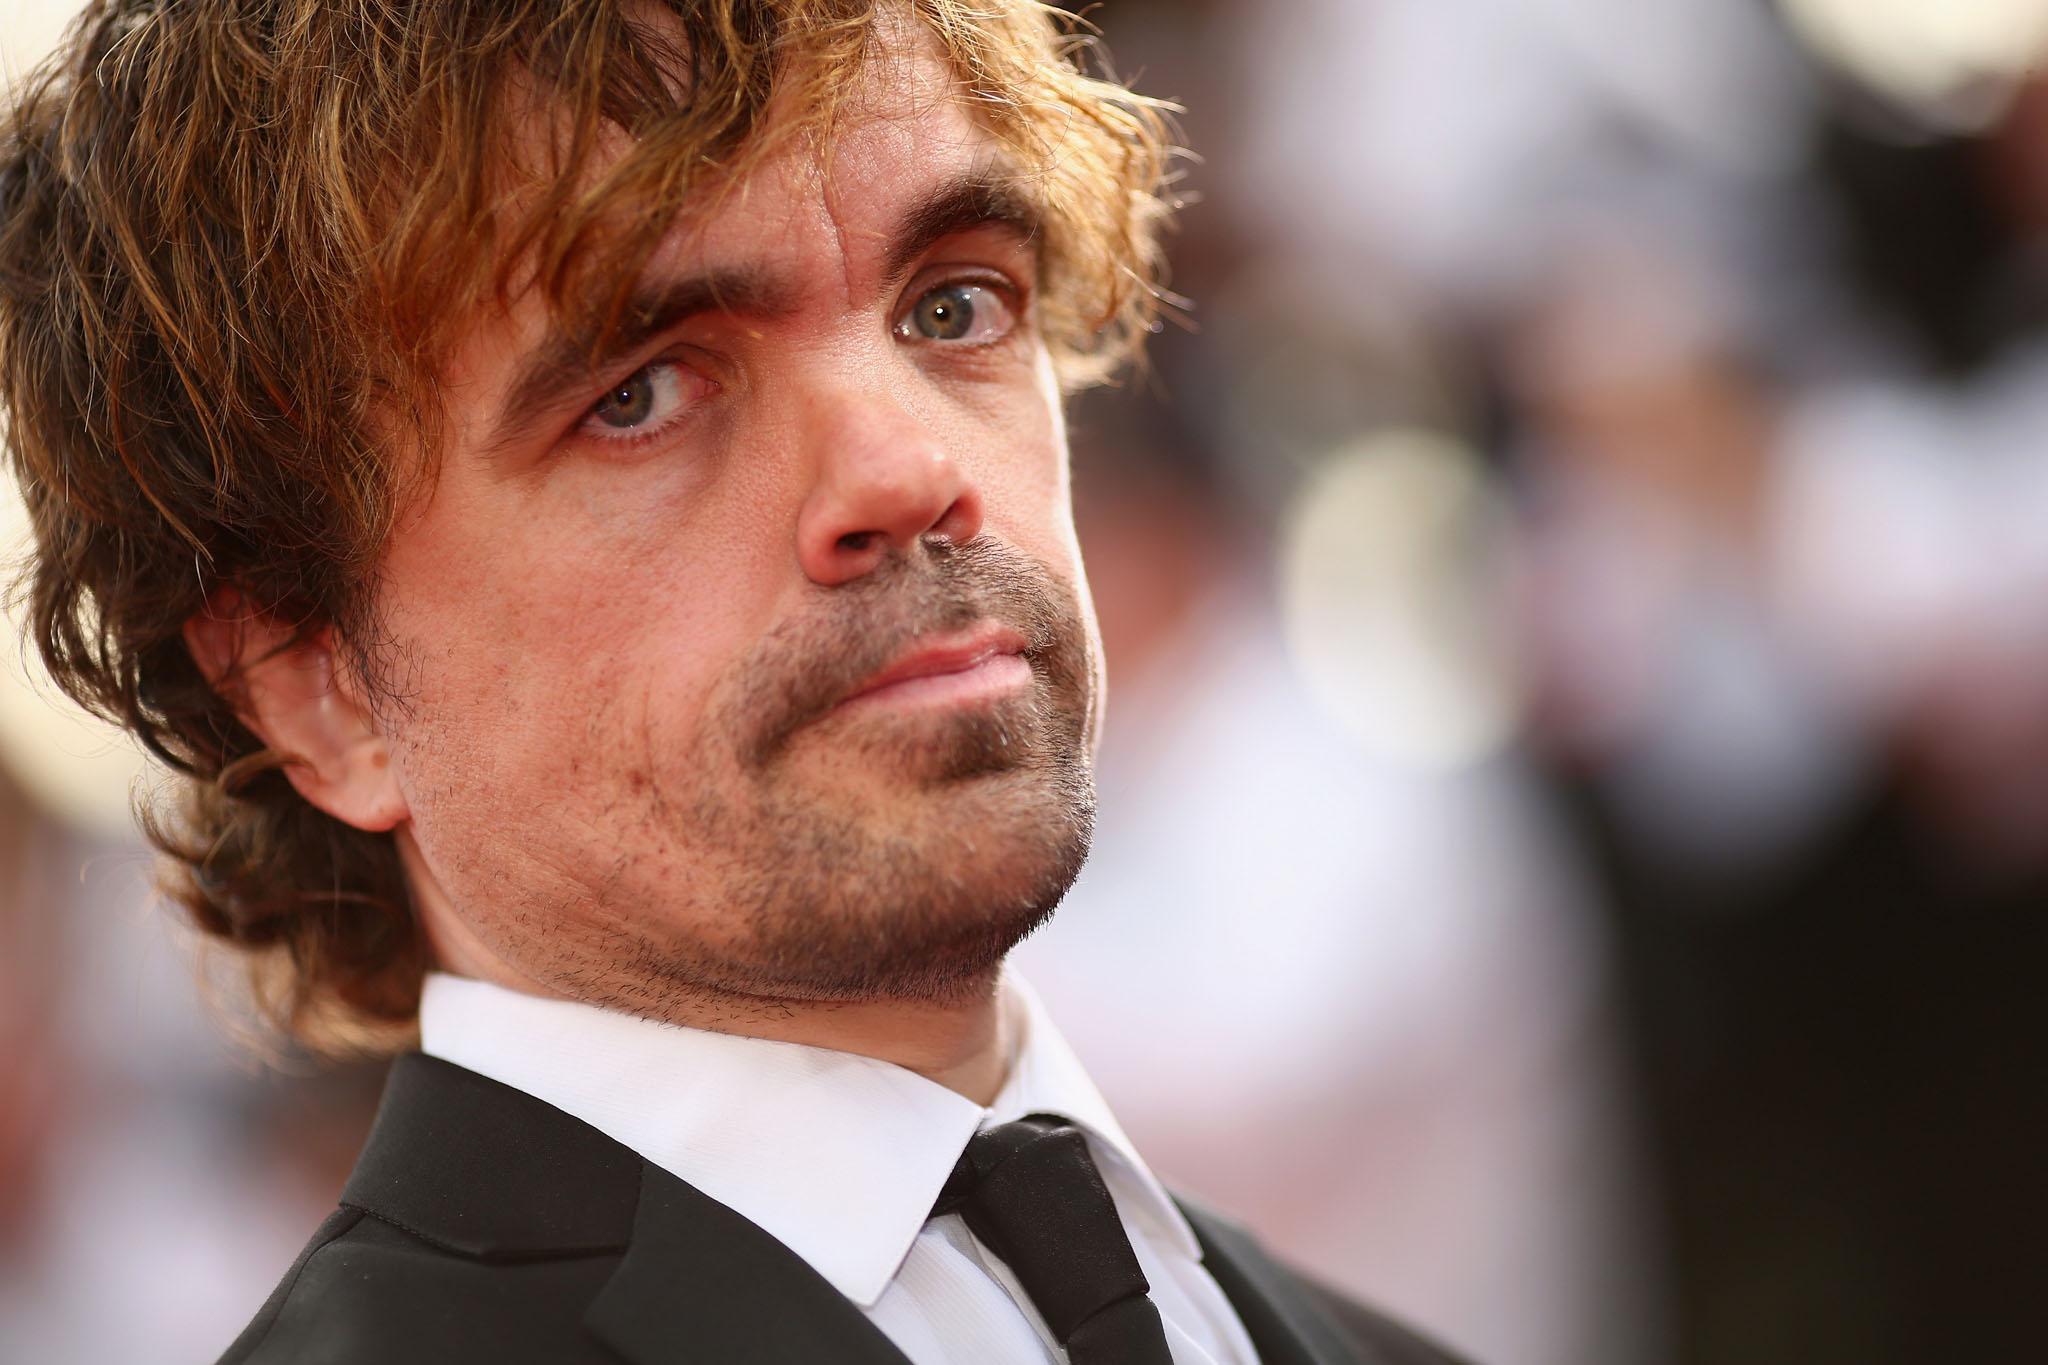 Peter Dinklage won a Golden Globe for Game of Thrones